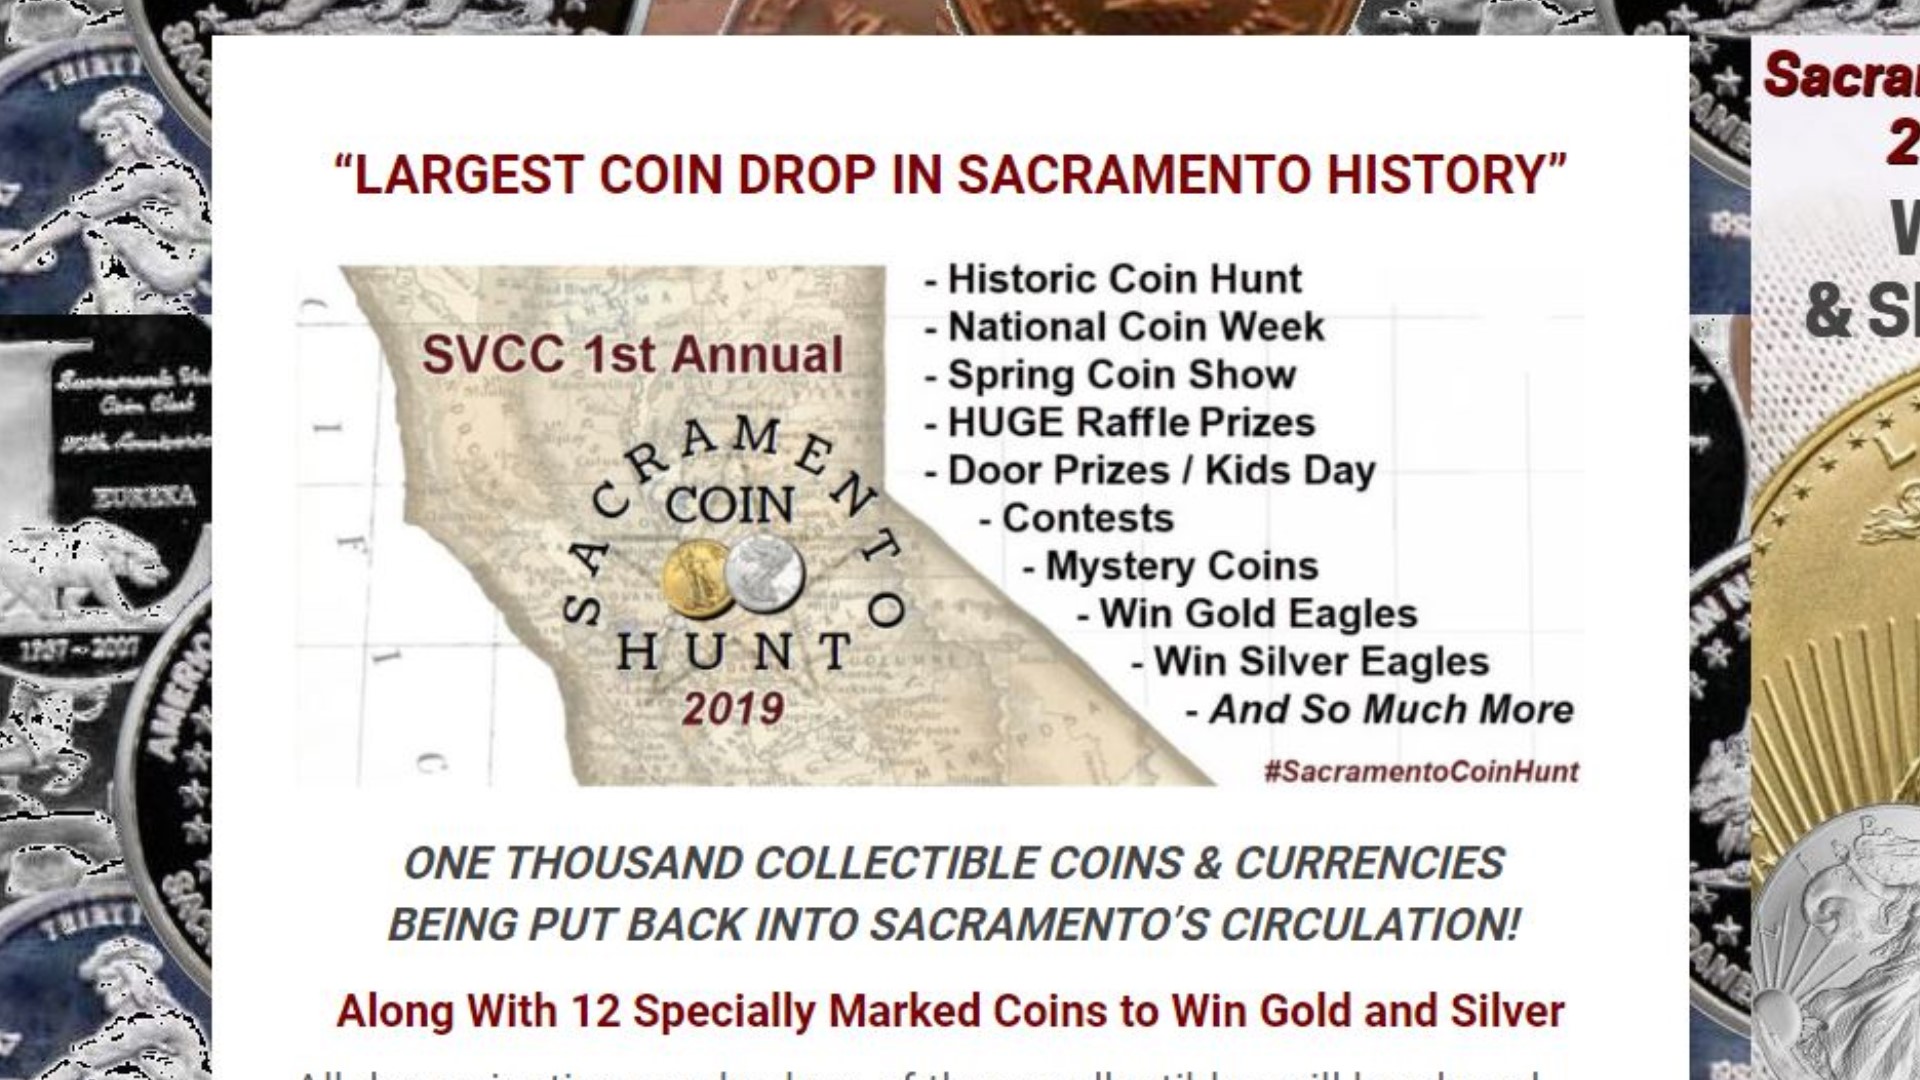 Keep an extra close eye on your change this week. Roughly 1,000 pieces of old coins and currency are being recirculated in Sacramento as part of a nationwide coin hunt -- and you could be the one to find them.